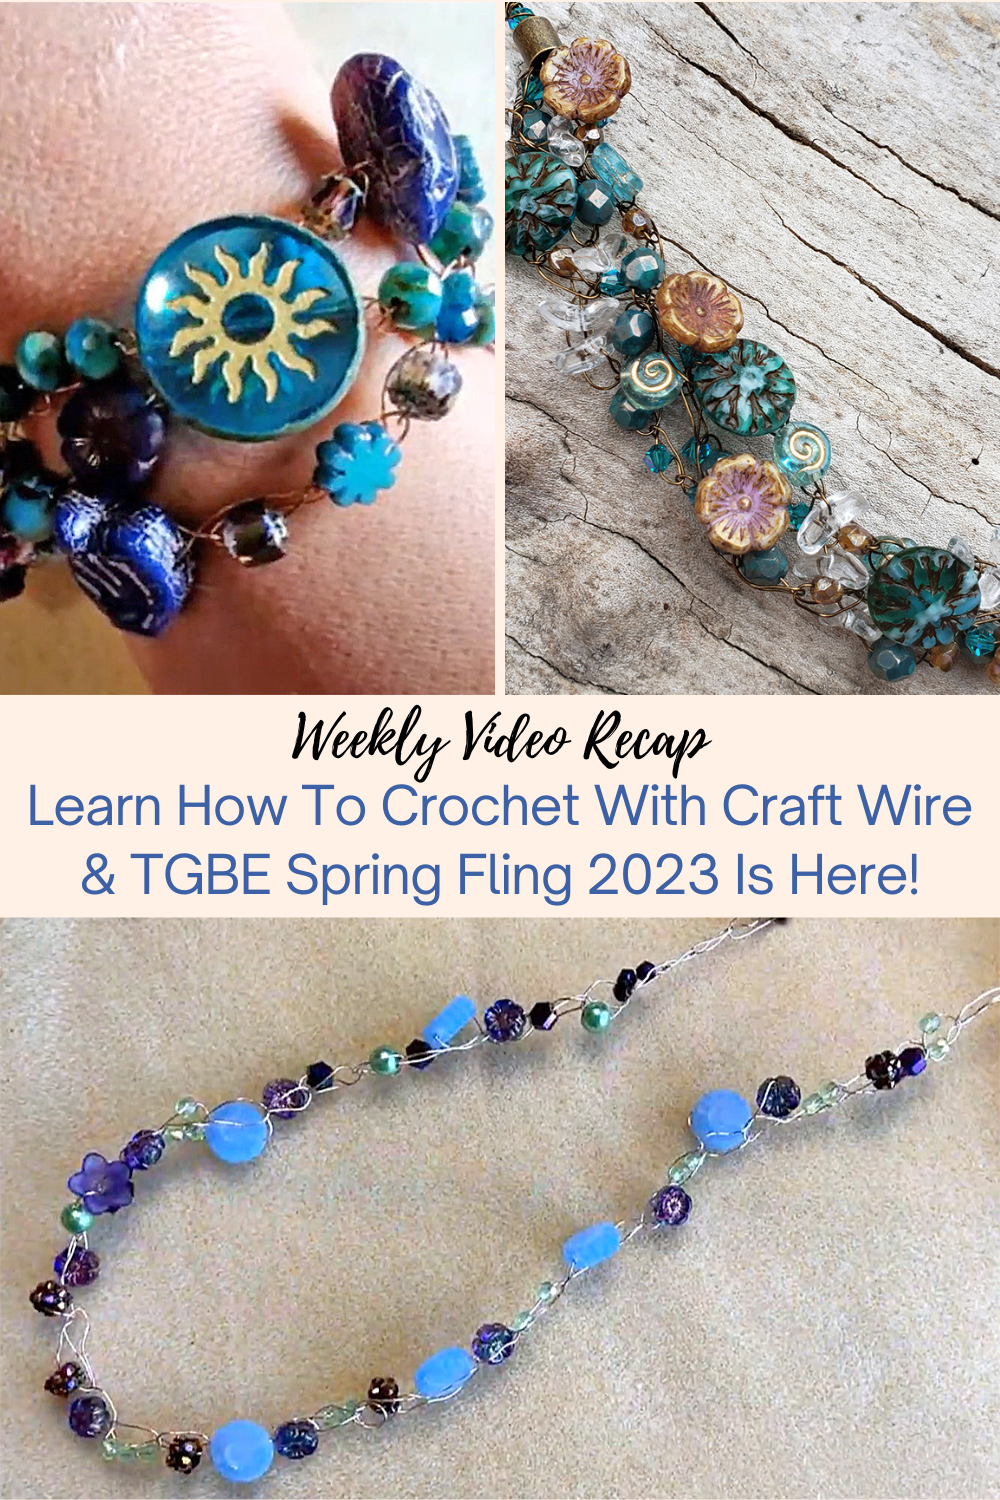 Learn How To Crochet With Craft Wire & TGBE Spring Fling 2023 Is Here! Collage